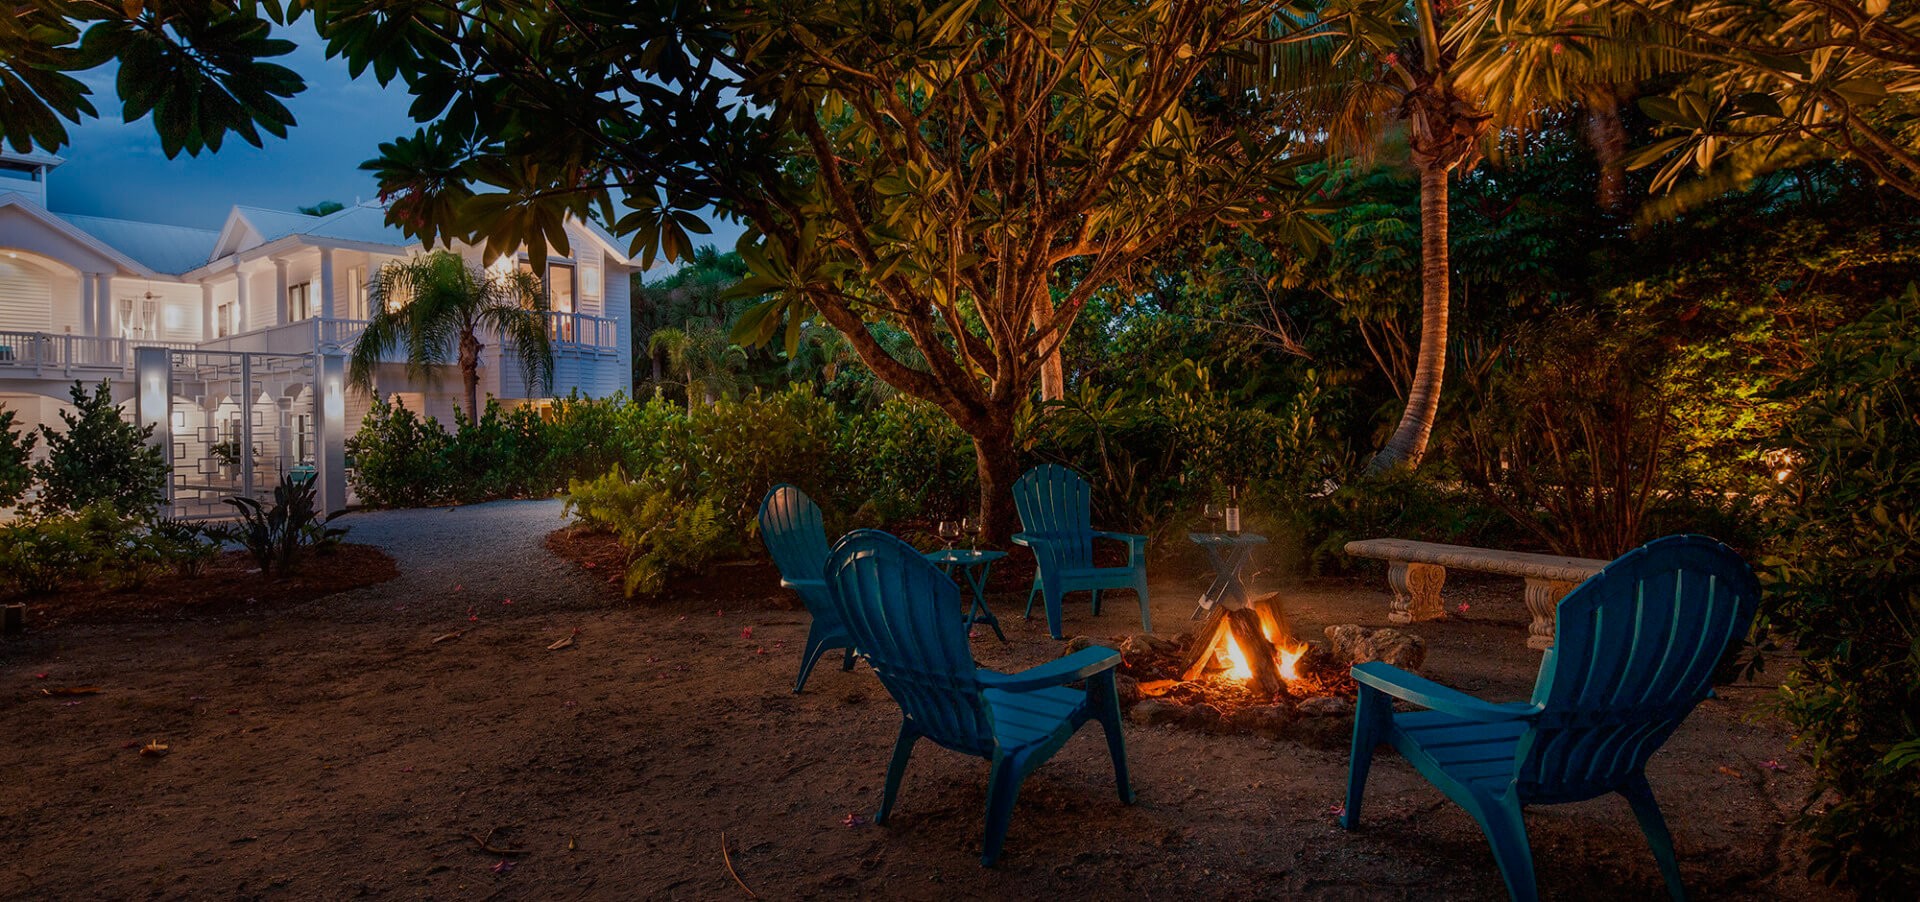 Chairs surrounding outdoor fire near palm trees and sand outside the Sea Oats Estate in Captiva Island, FL